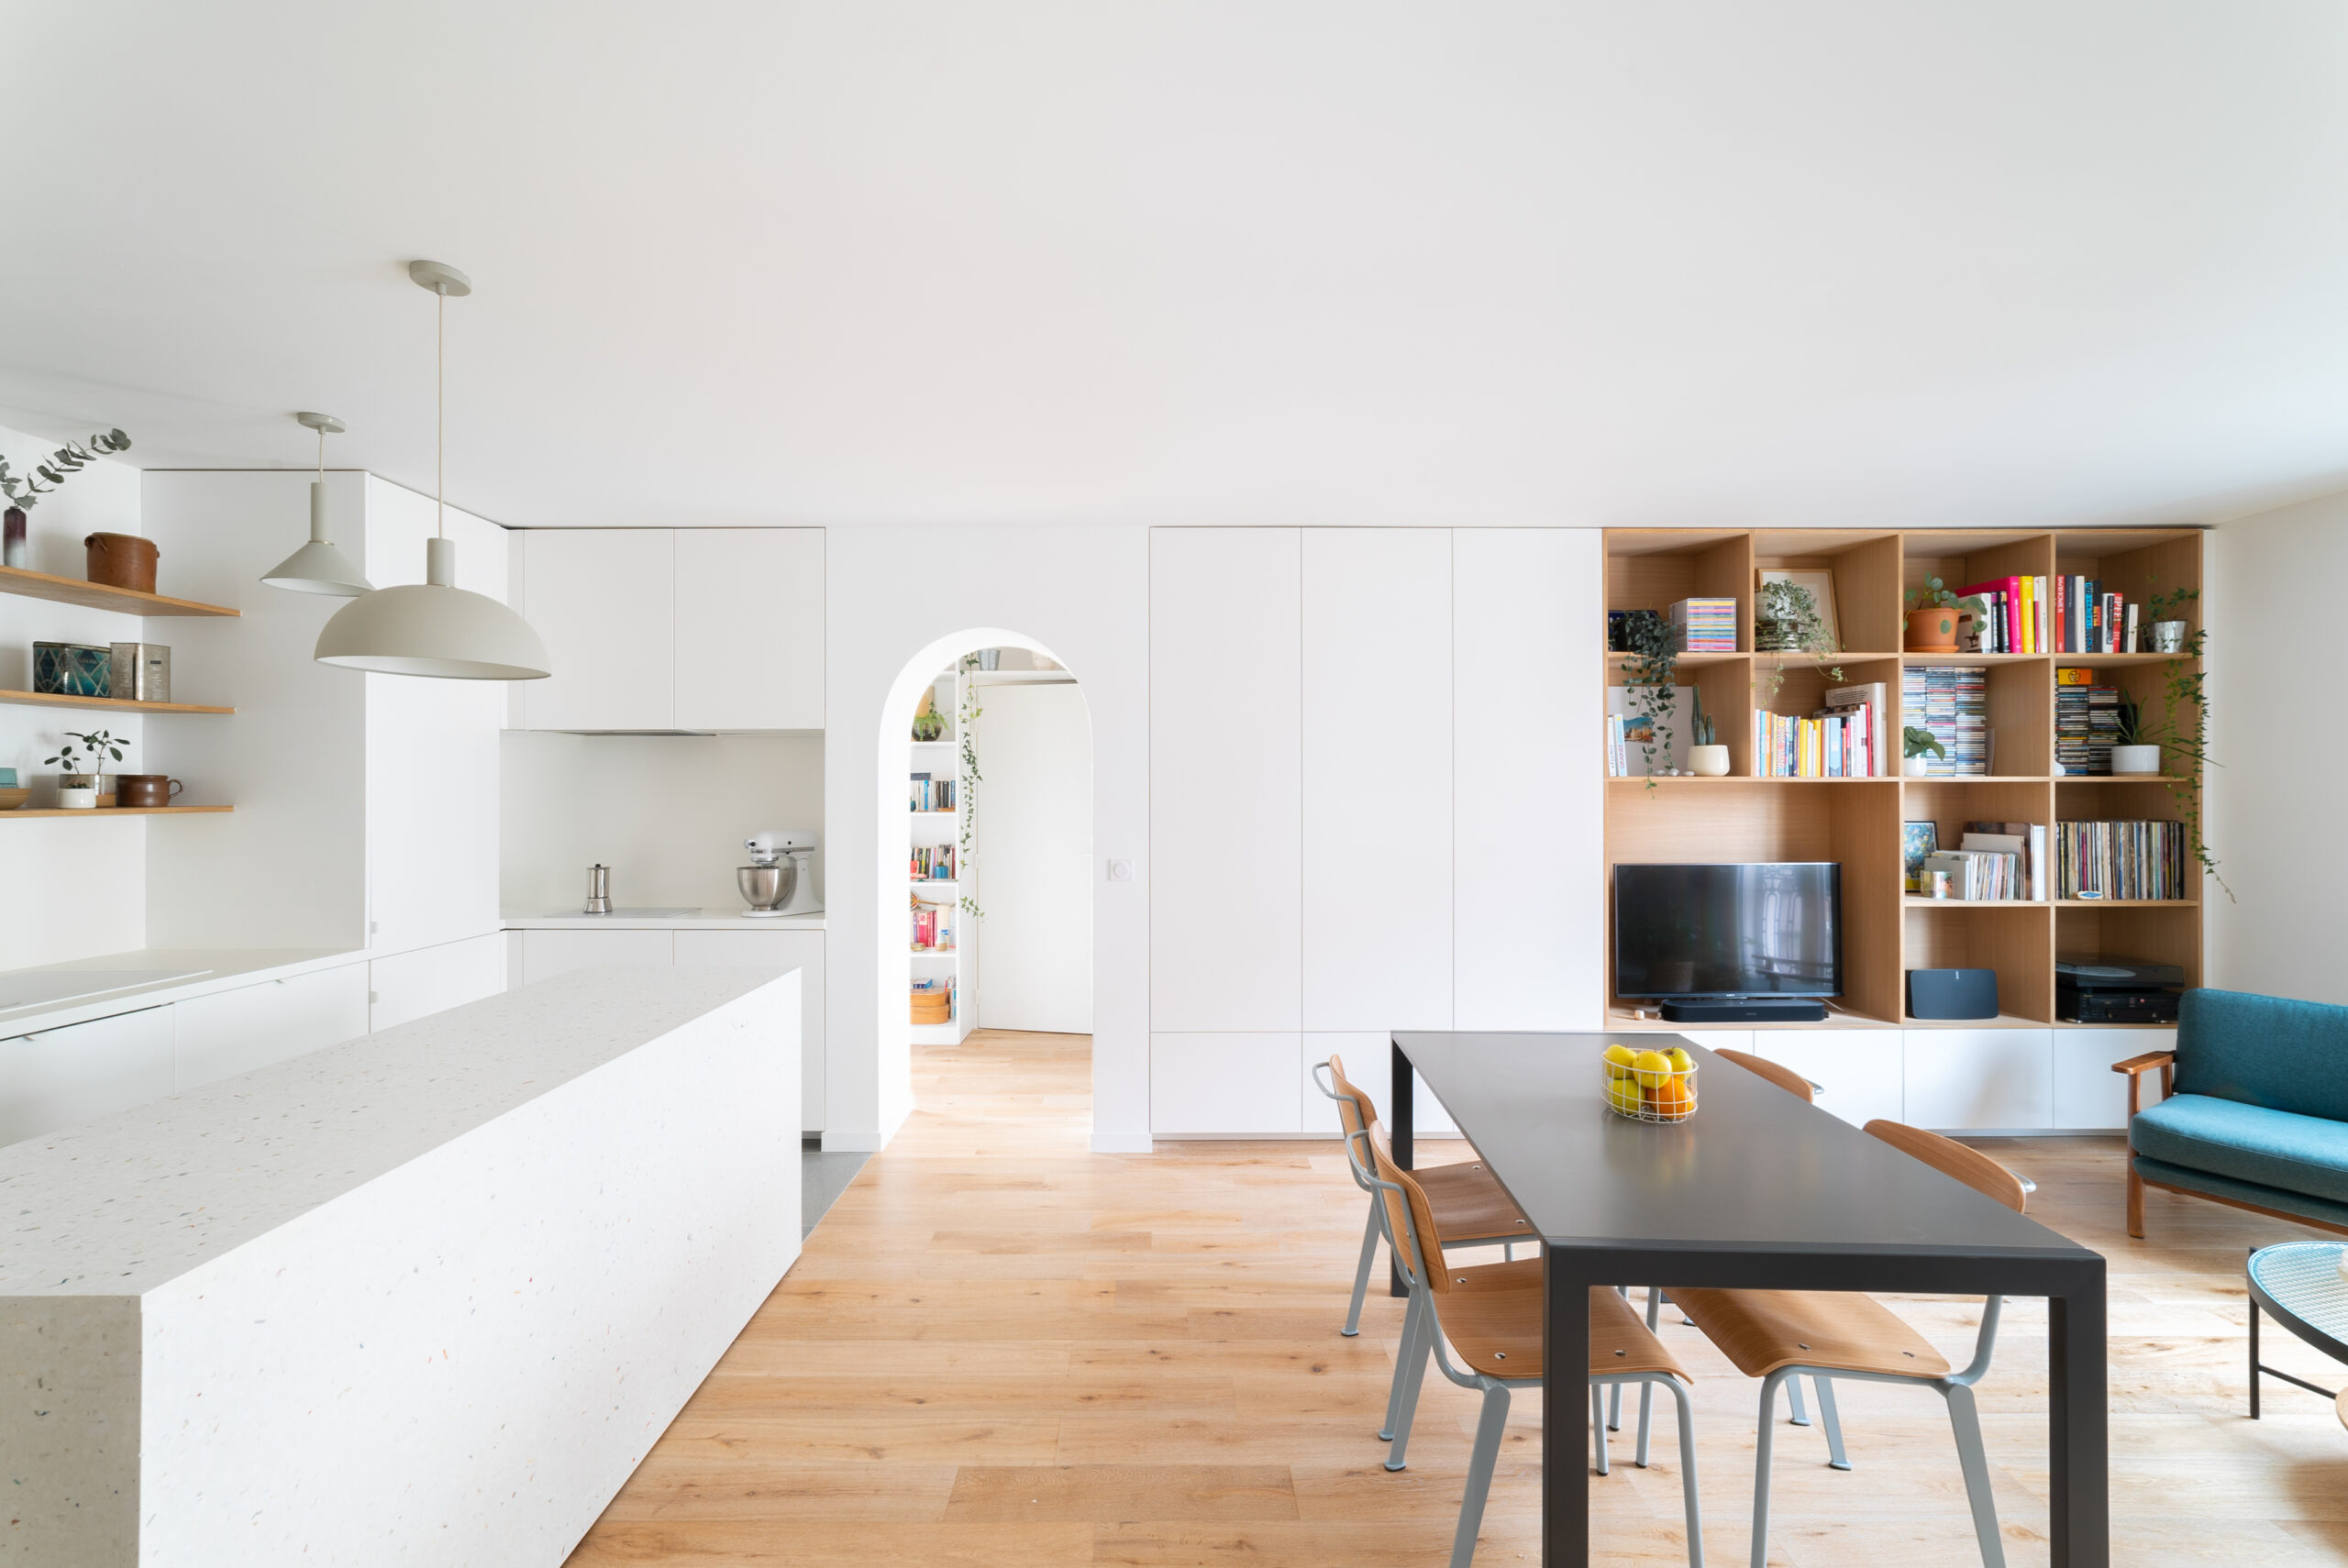 Alba 20mm. Apartment Neuf by Bazar Point Studio and QS Architects. Photography: Florian Bérenguer